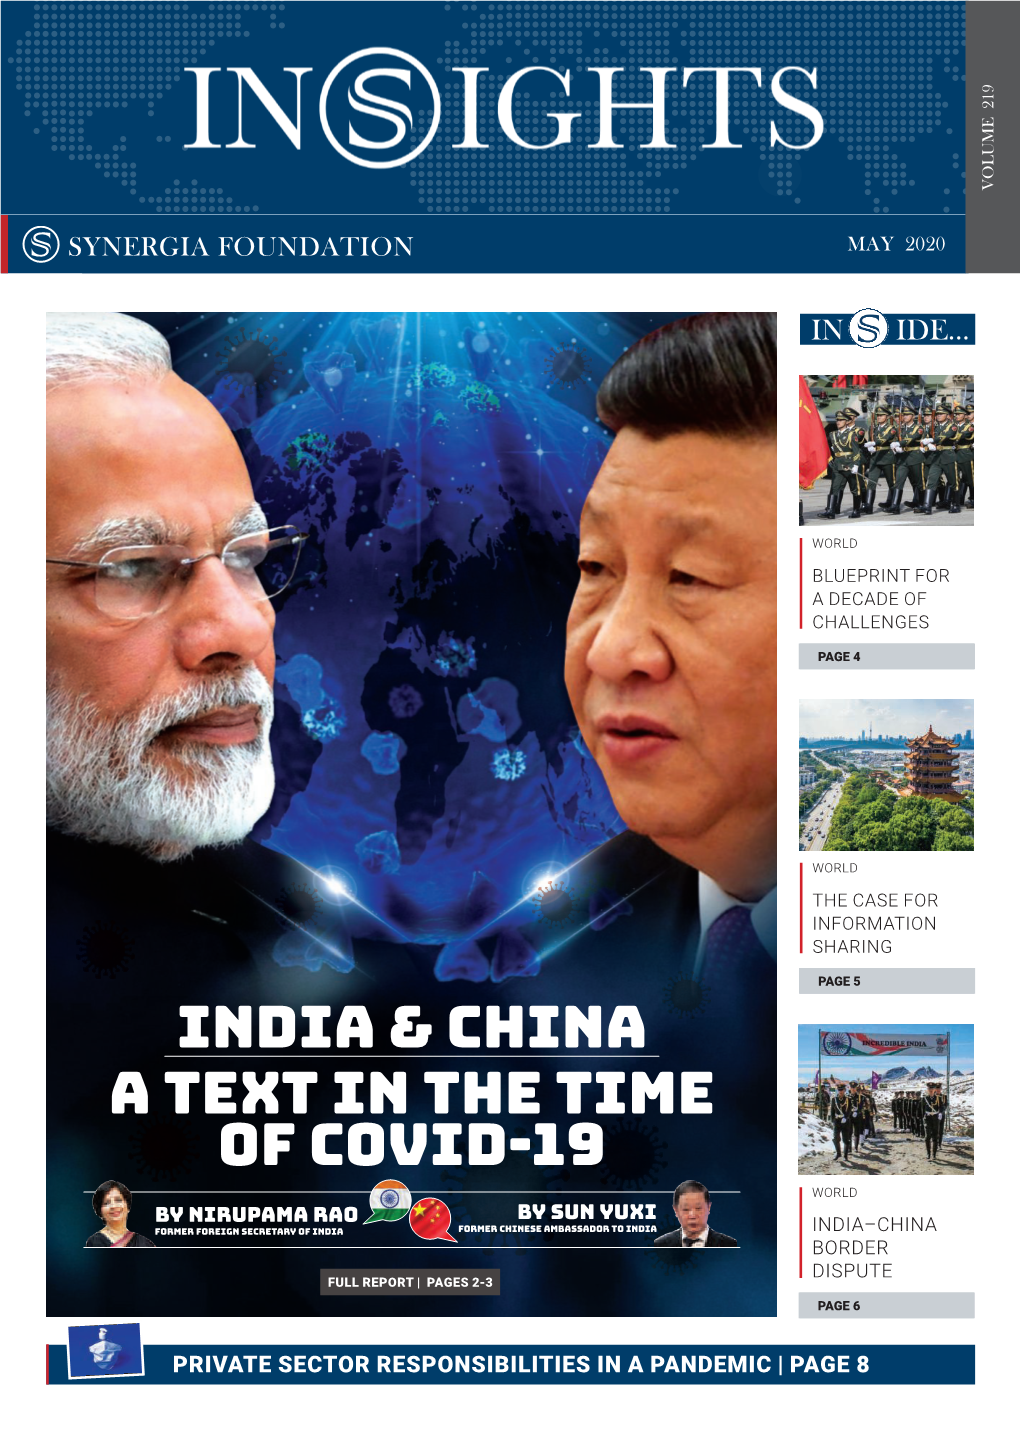 India & China a Text in the Time of Covid-19